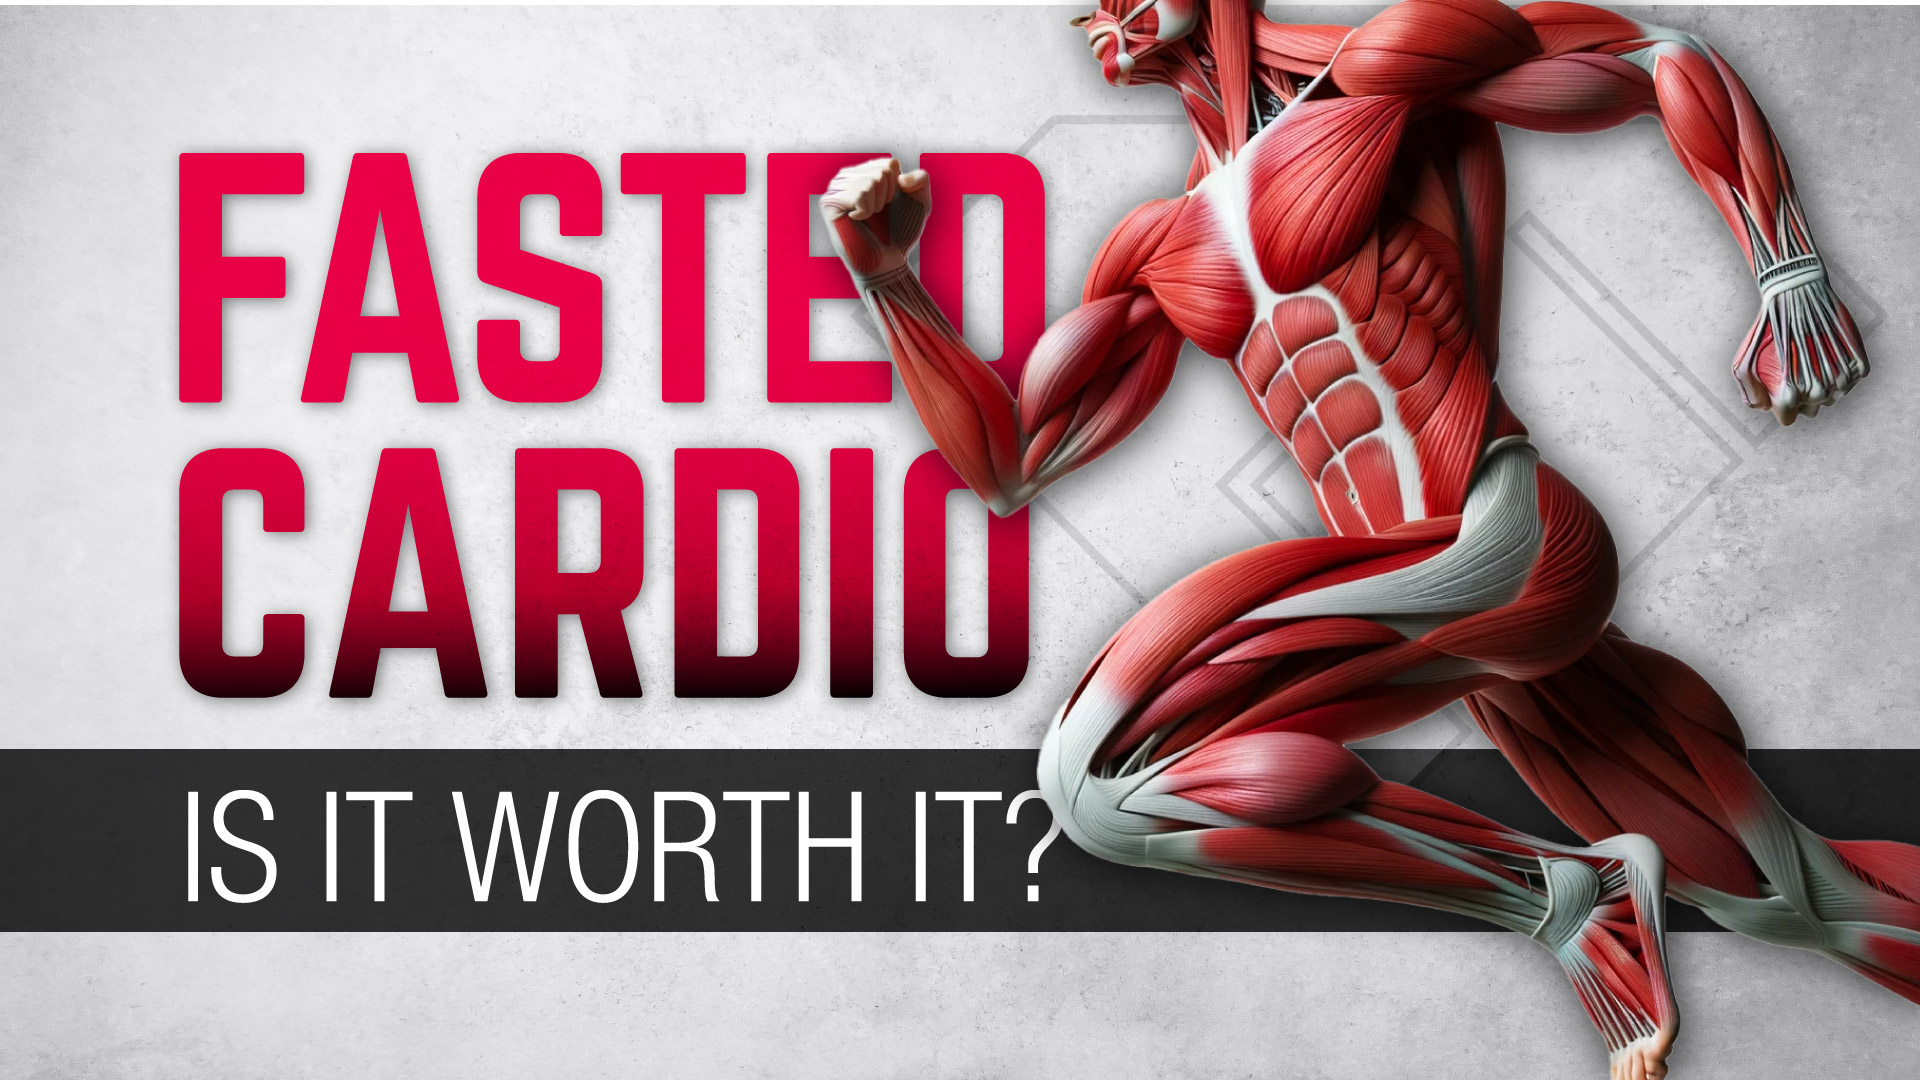 Featured image for “Fasted cardio for fat loss and muscle gain – Is it worth it?”